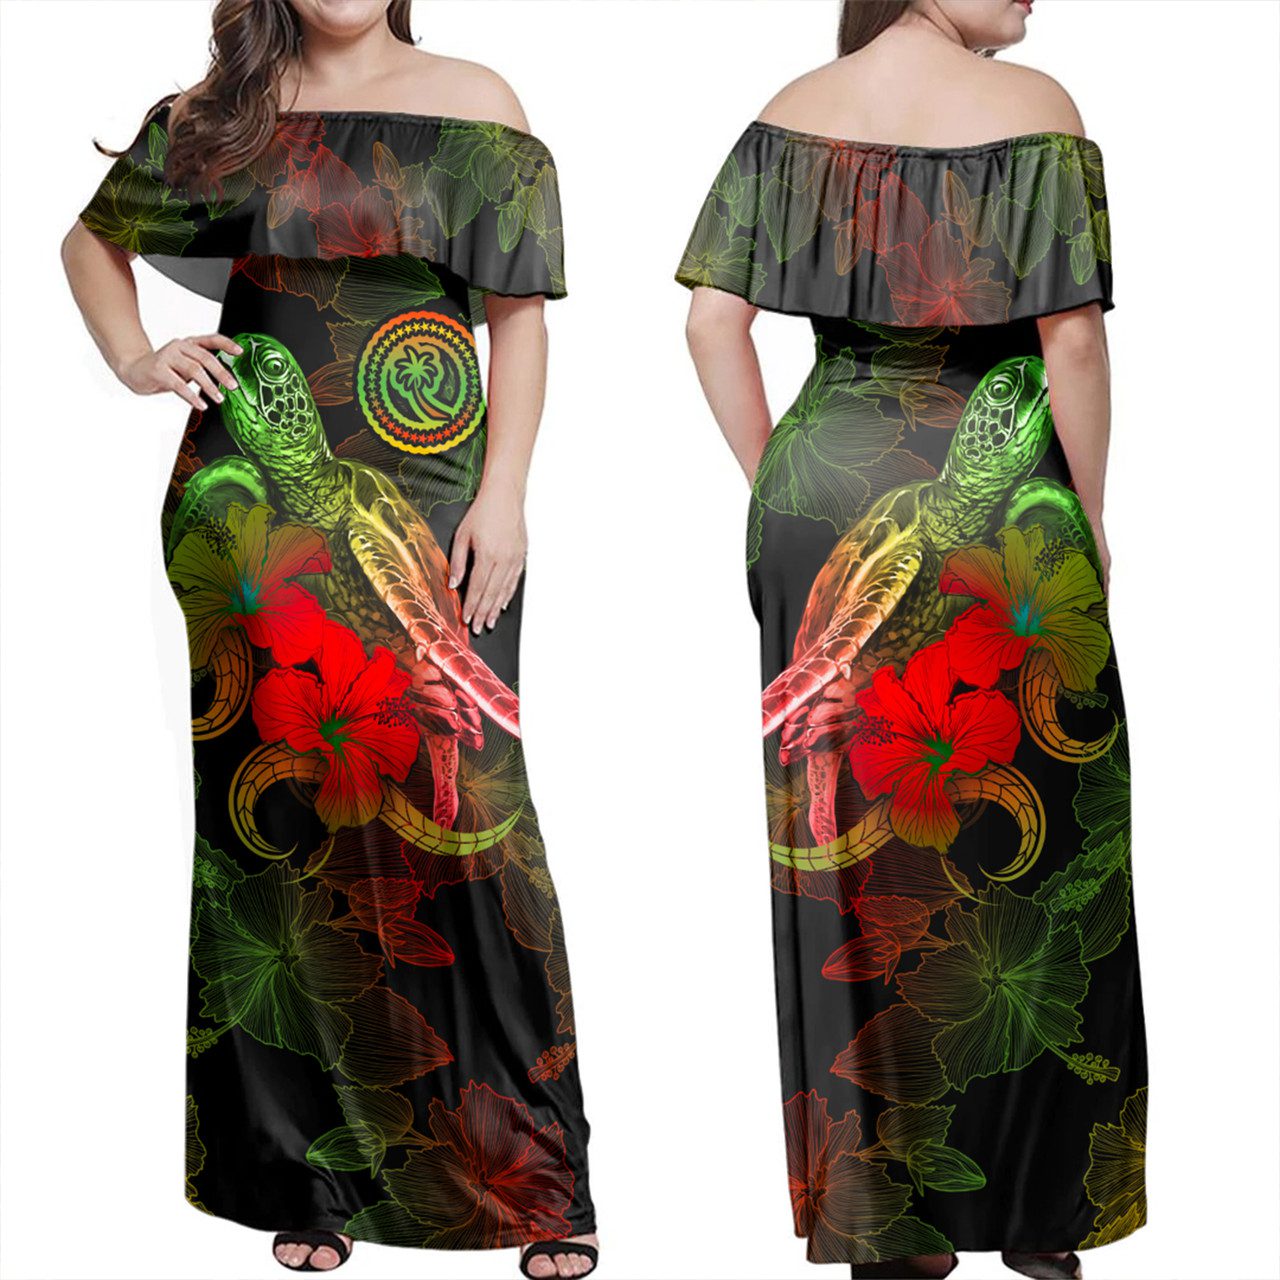 Chuuk State Woman Off Shoulder Long Dress – Sea Turtle With Blooming Hibiscus Flowers Reggae